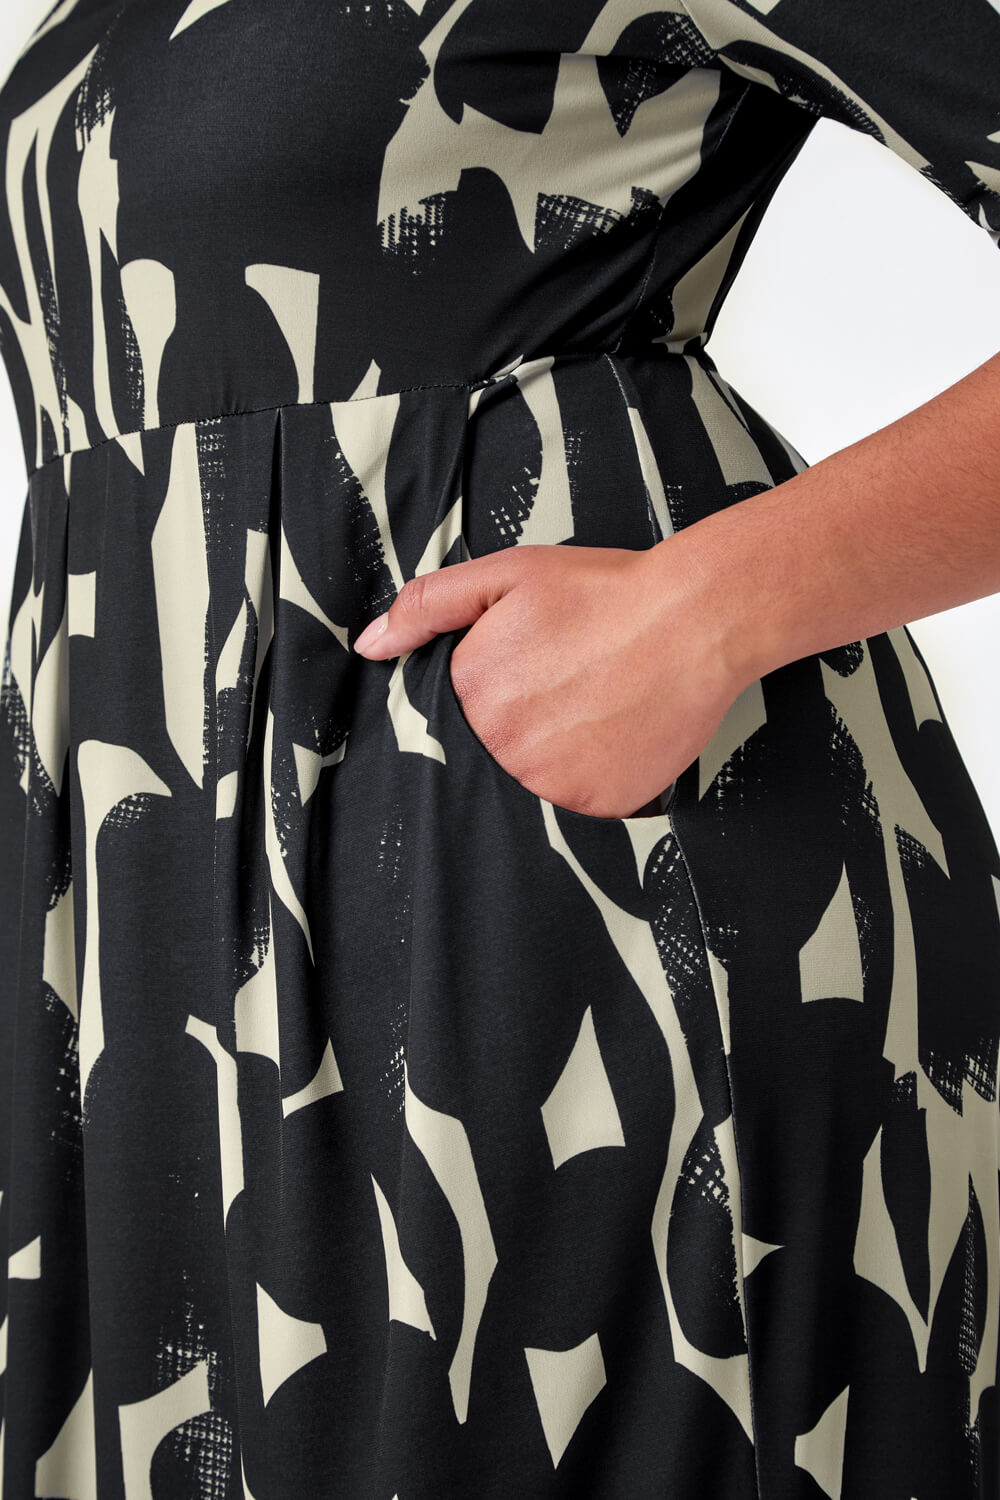 Black Curve Abstract Print Stretch Dress, Image 5 of 5